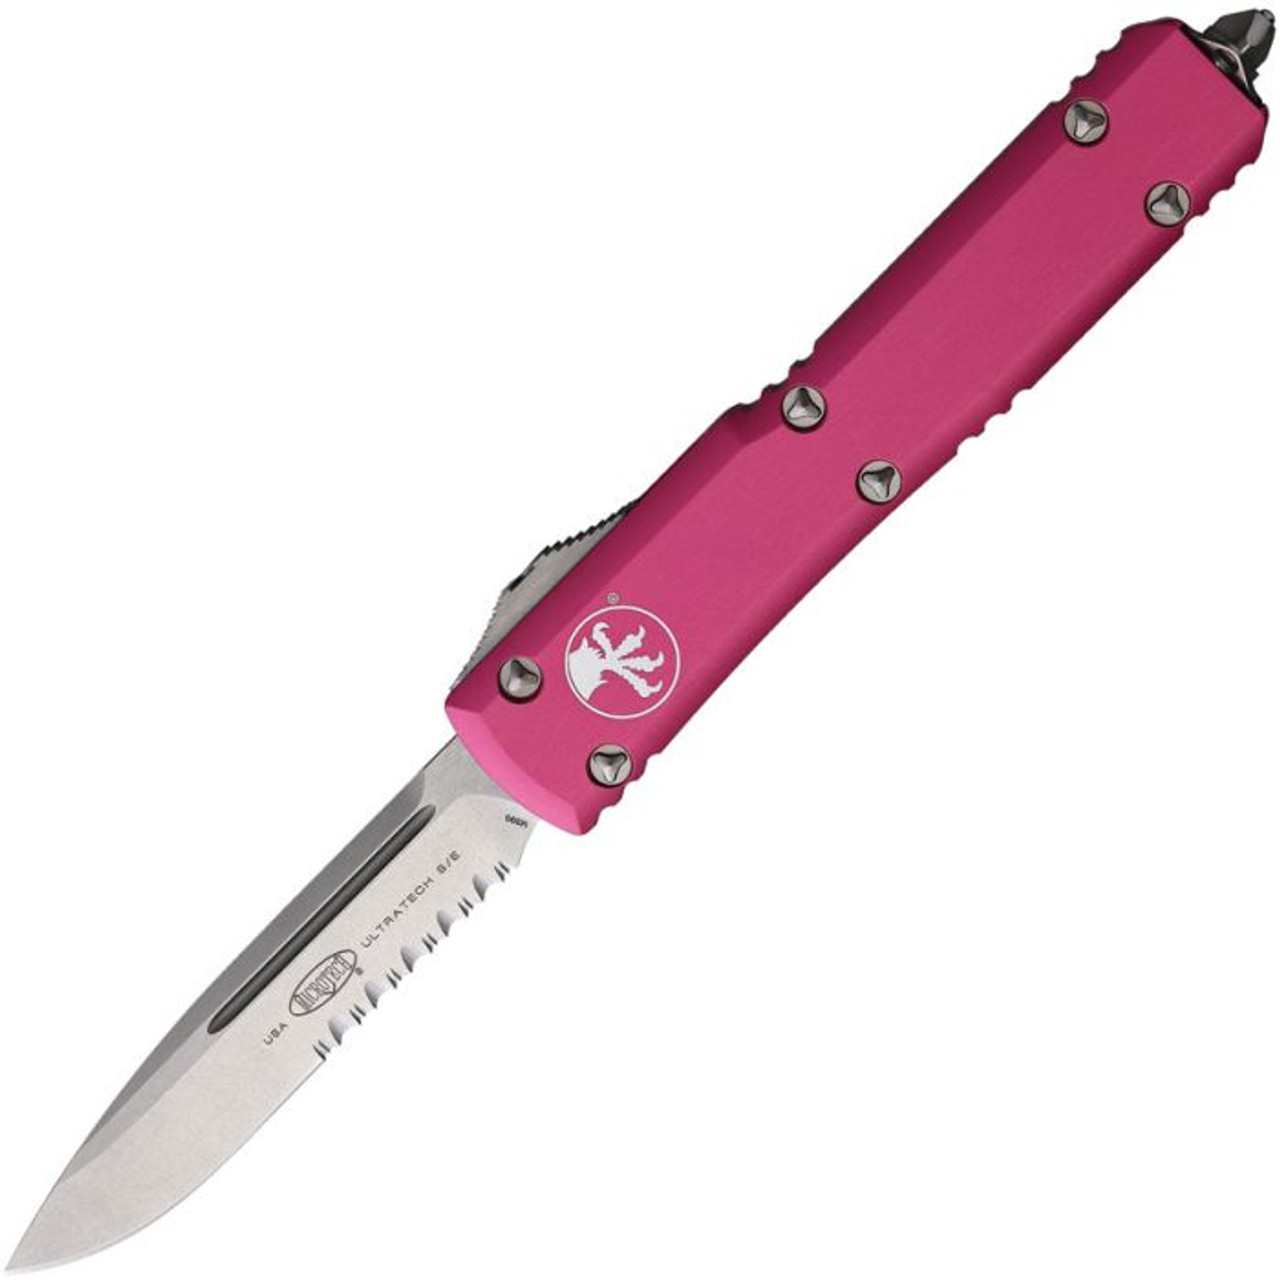 Microtech Ultratech S/E (MCT12111PK) 3.5" Bohler M390 Stonewashed Drop Point Partially Serrated Blade, Pink Anodized Aluminum Handle